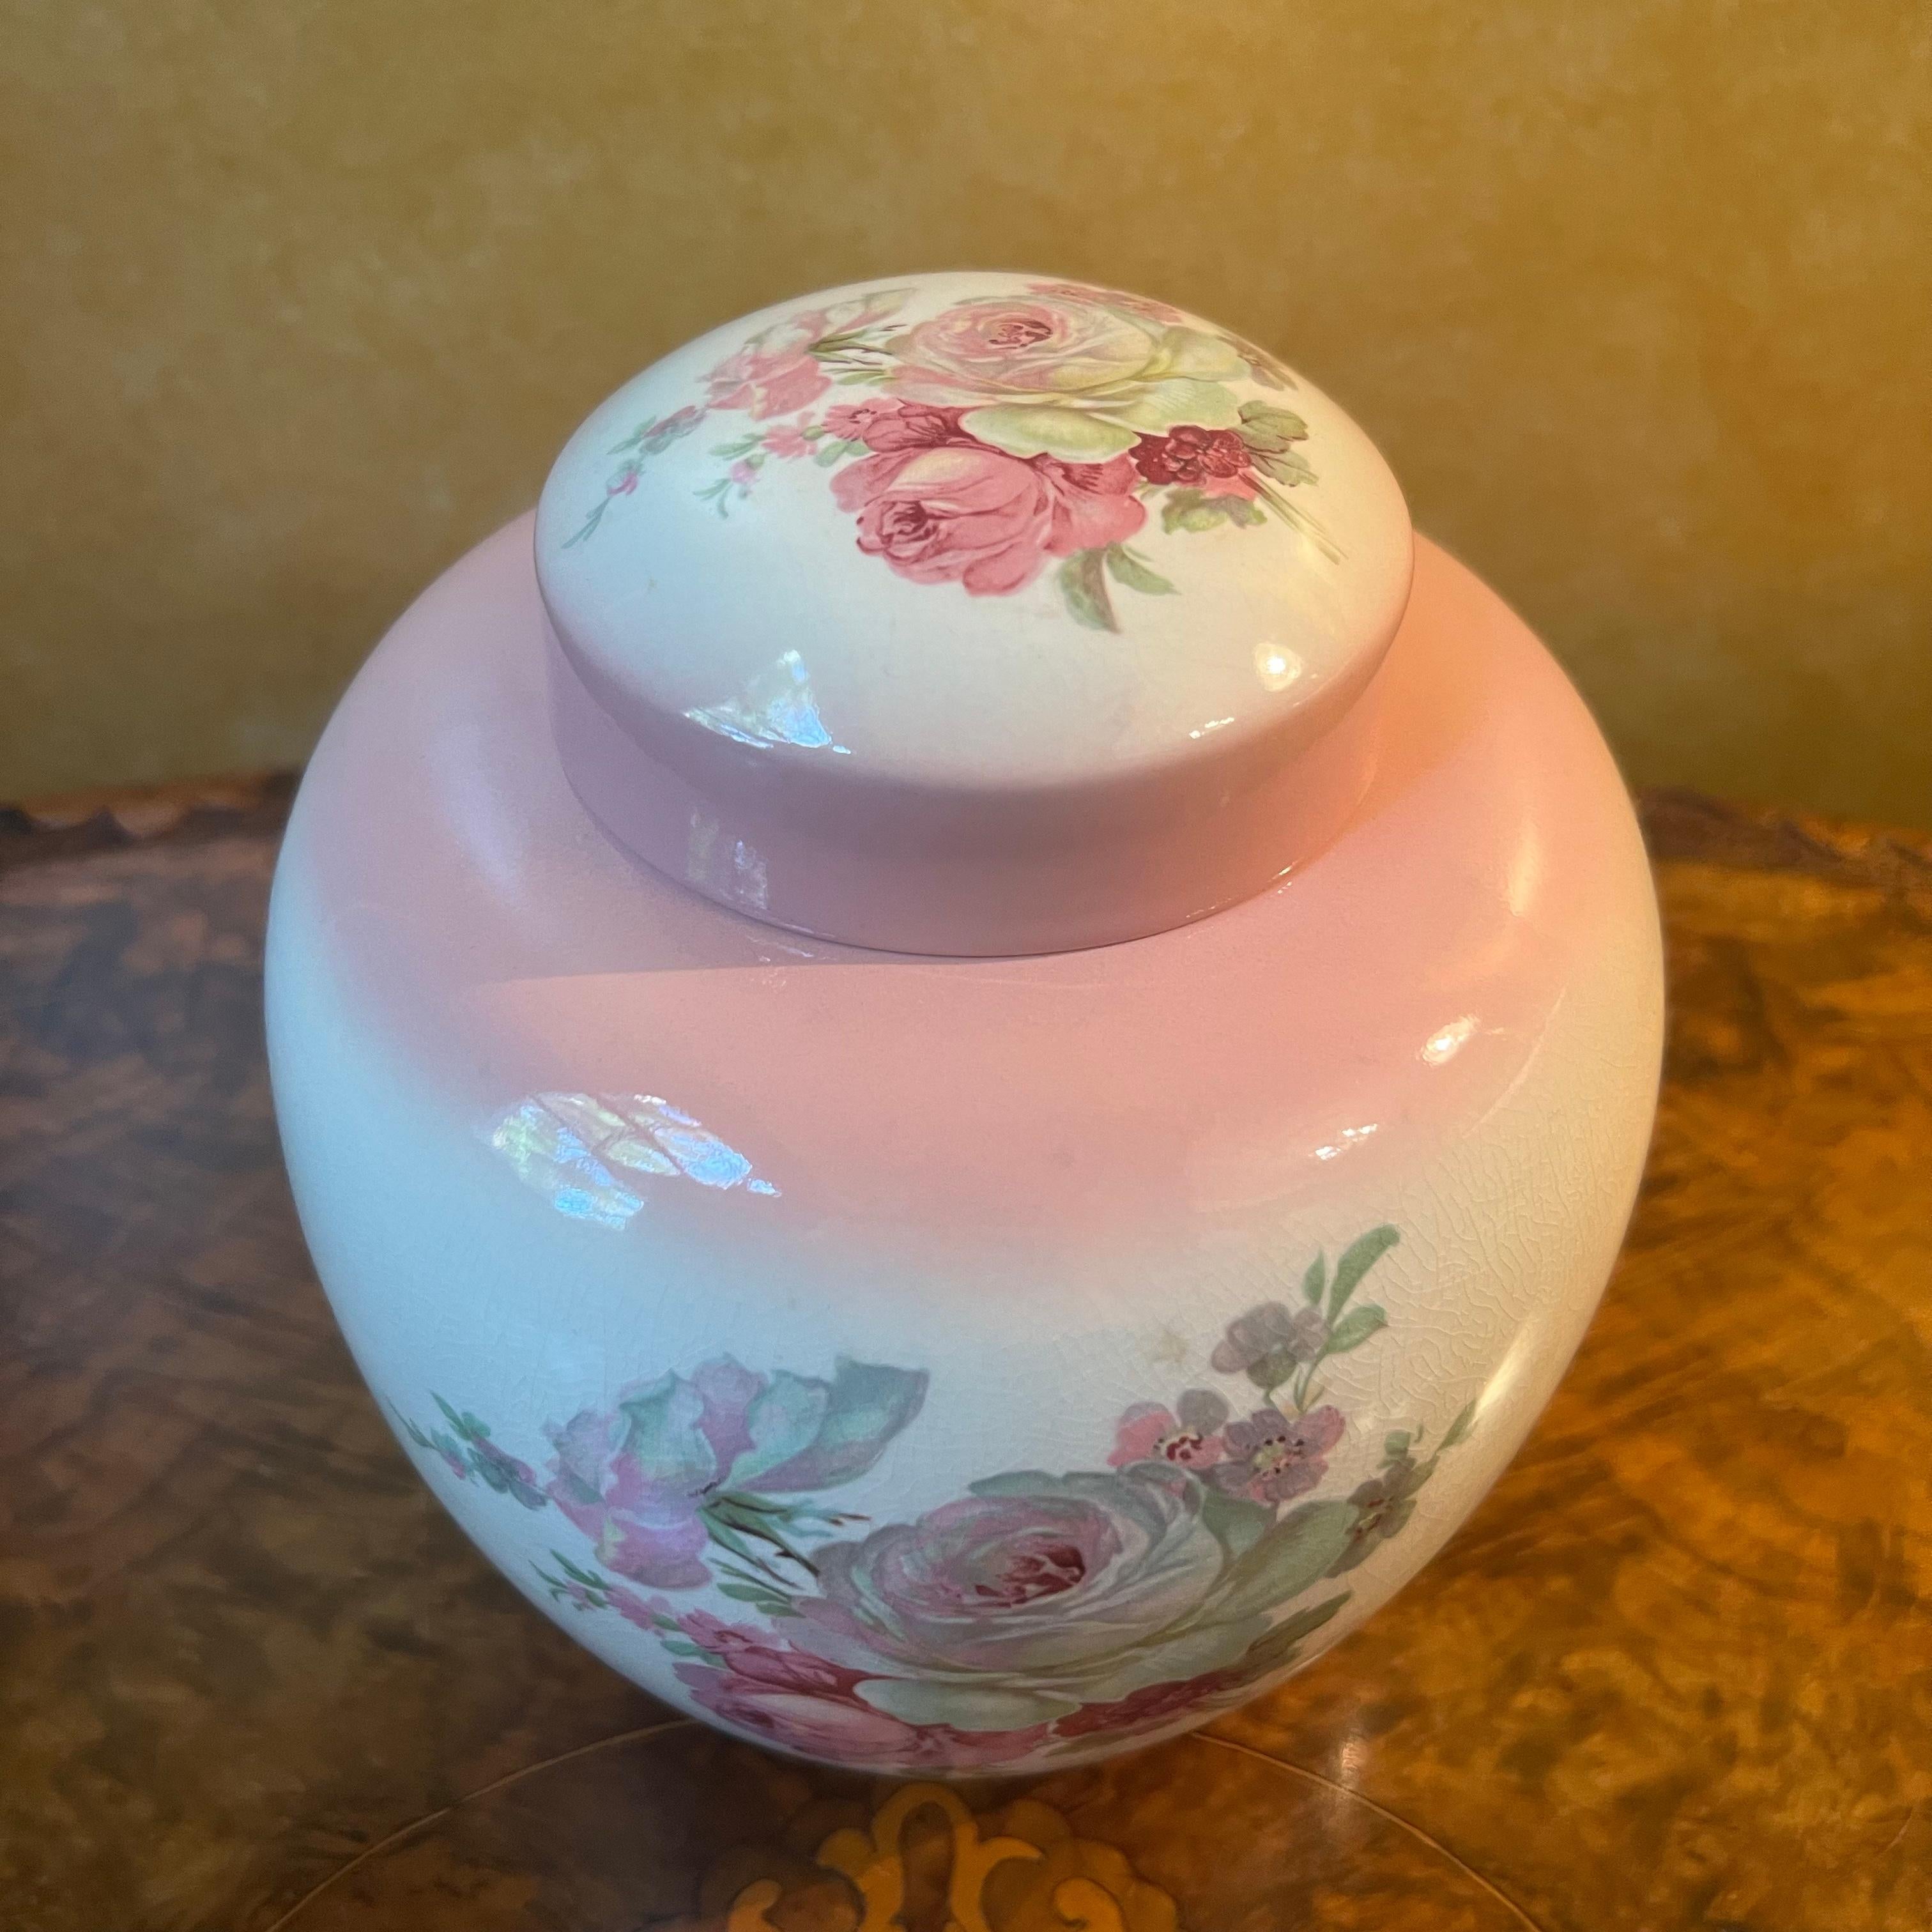 Pink with posy print centre, crazing, stamped James Kent Old Foley Victoria Rose.

Circa: 1950s

Material: Porcelain  

Country Of Origin: England   

Measurements: 16cm high, 7.5cm diameter of top opening, 15cm mid diameter  

Postage via Australia